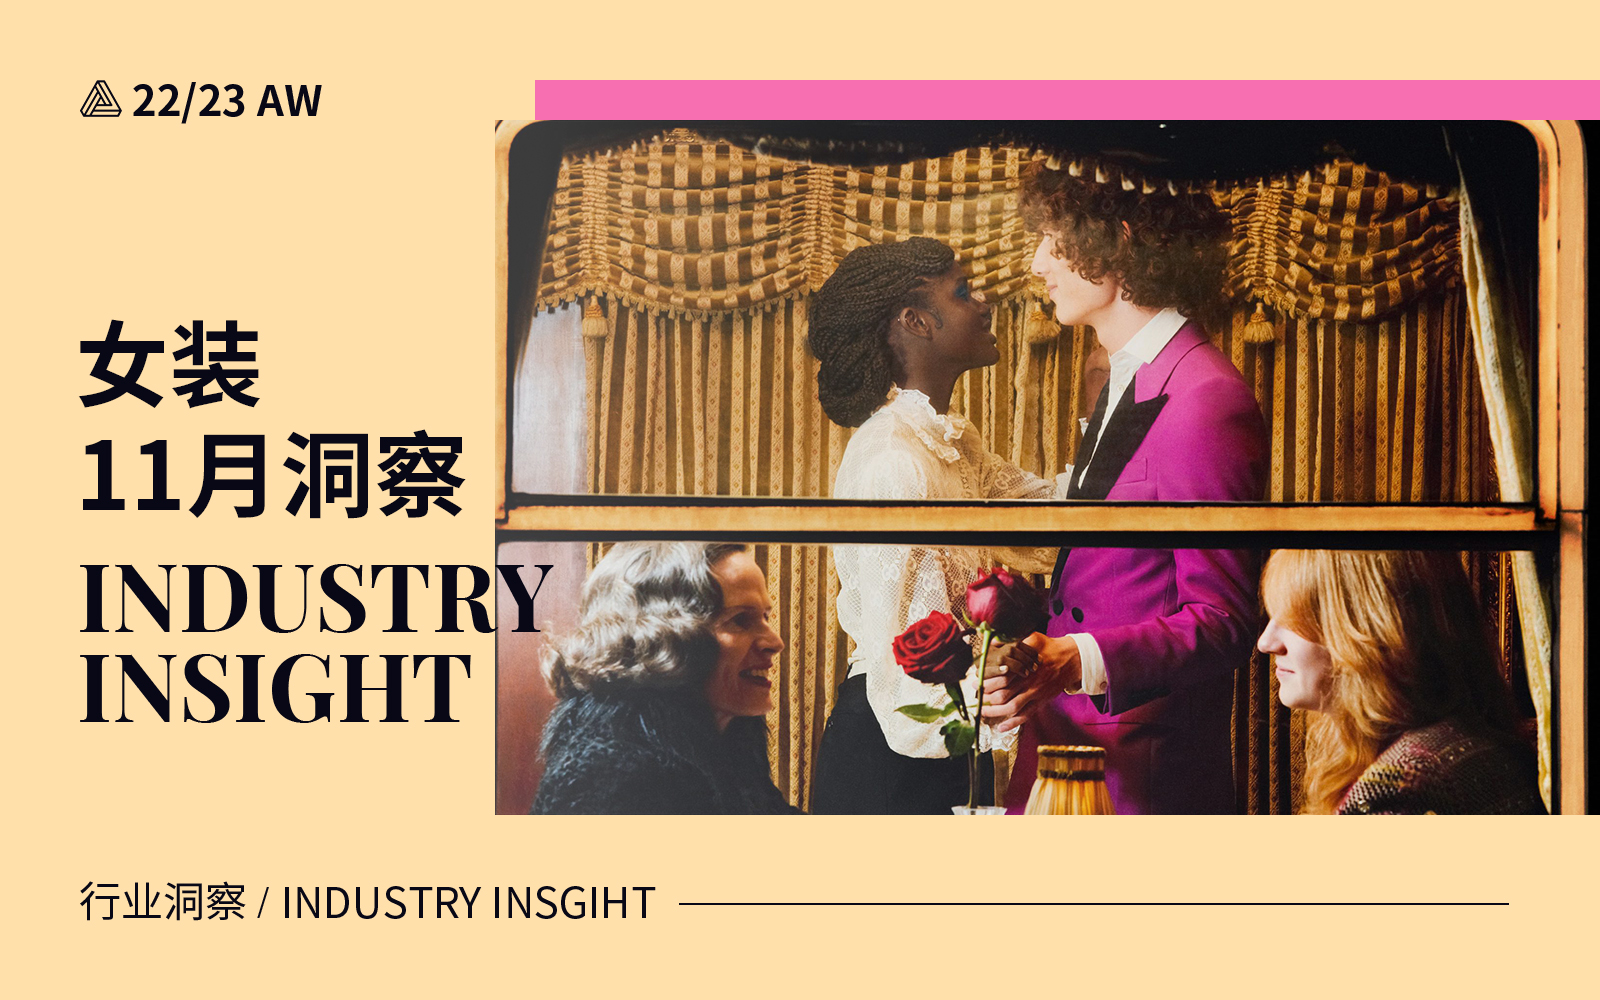 November 2022 -- The Industry Insight of Womenswear